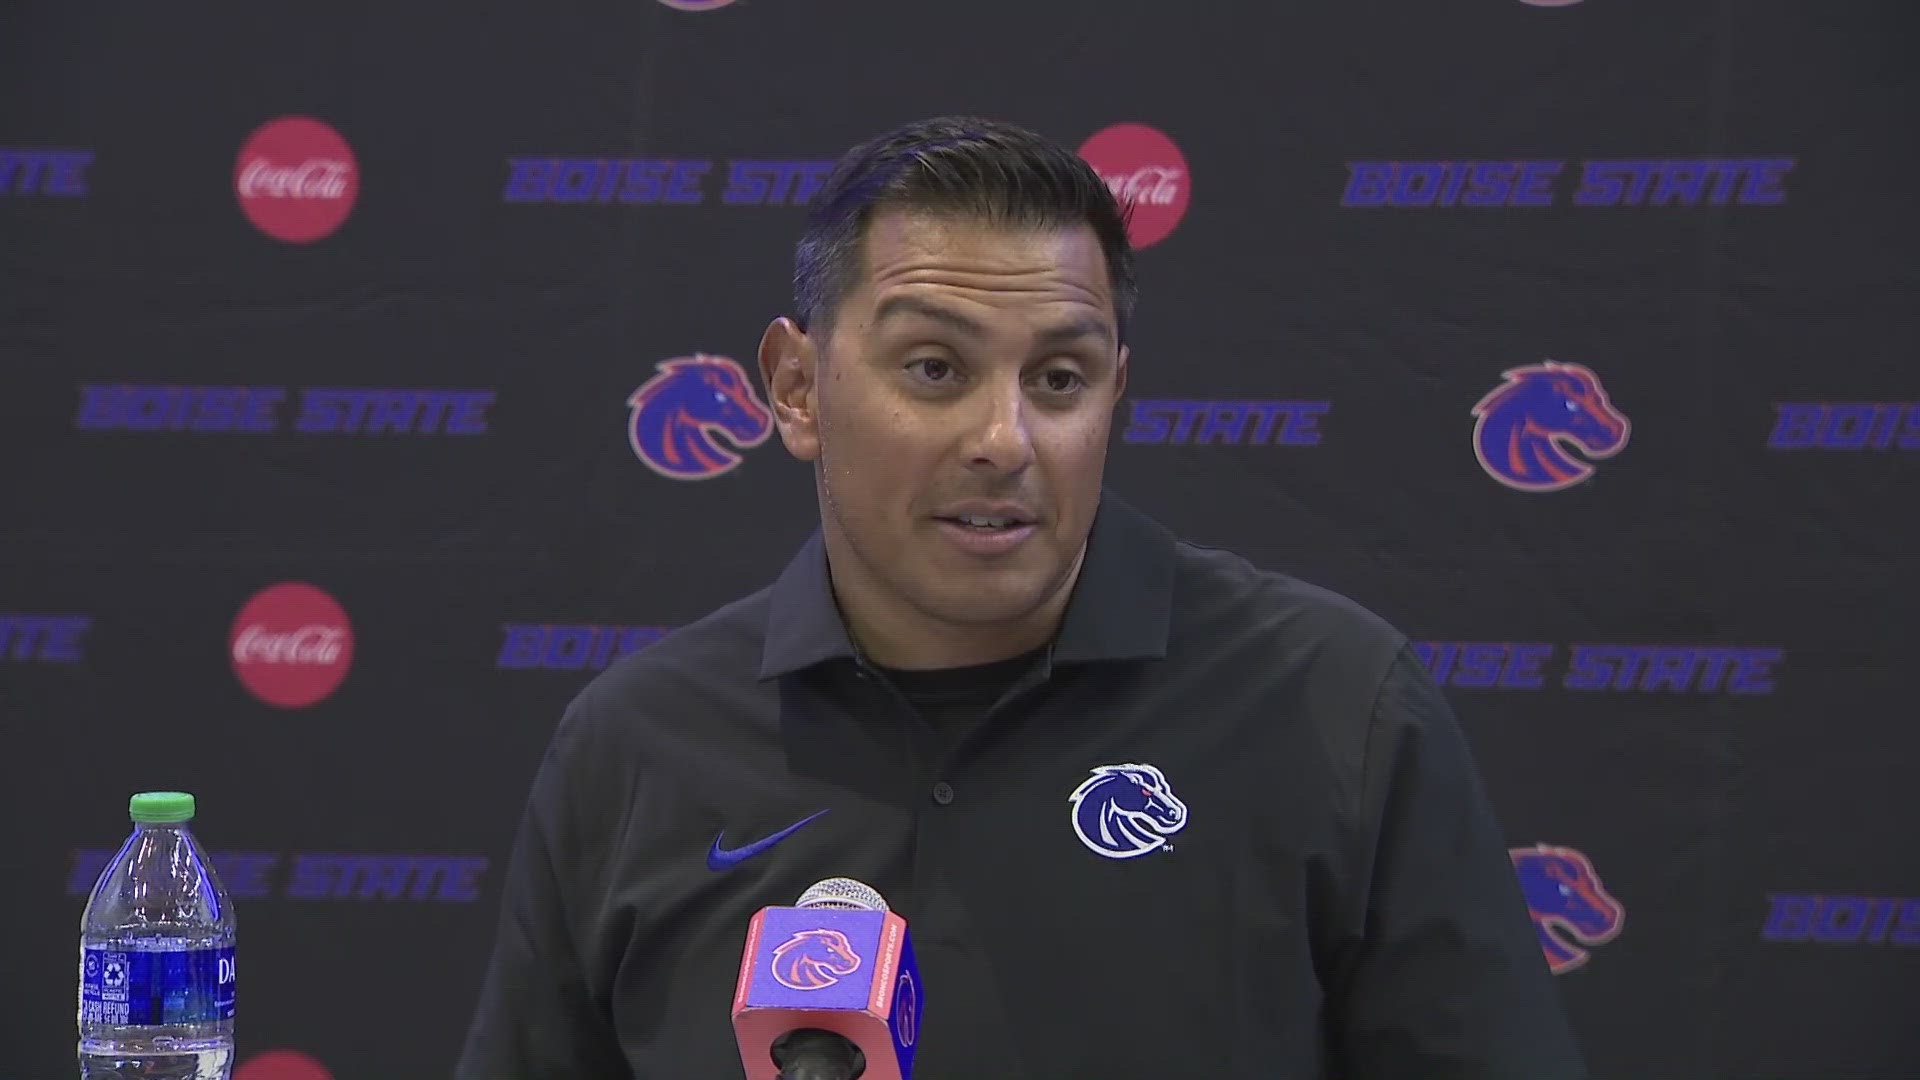 Avalos provided a fall camp preview on Monday, naming captains, discussing injuries, highlighted position battles and more. The Broncos begin practice on Wednesday.